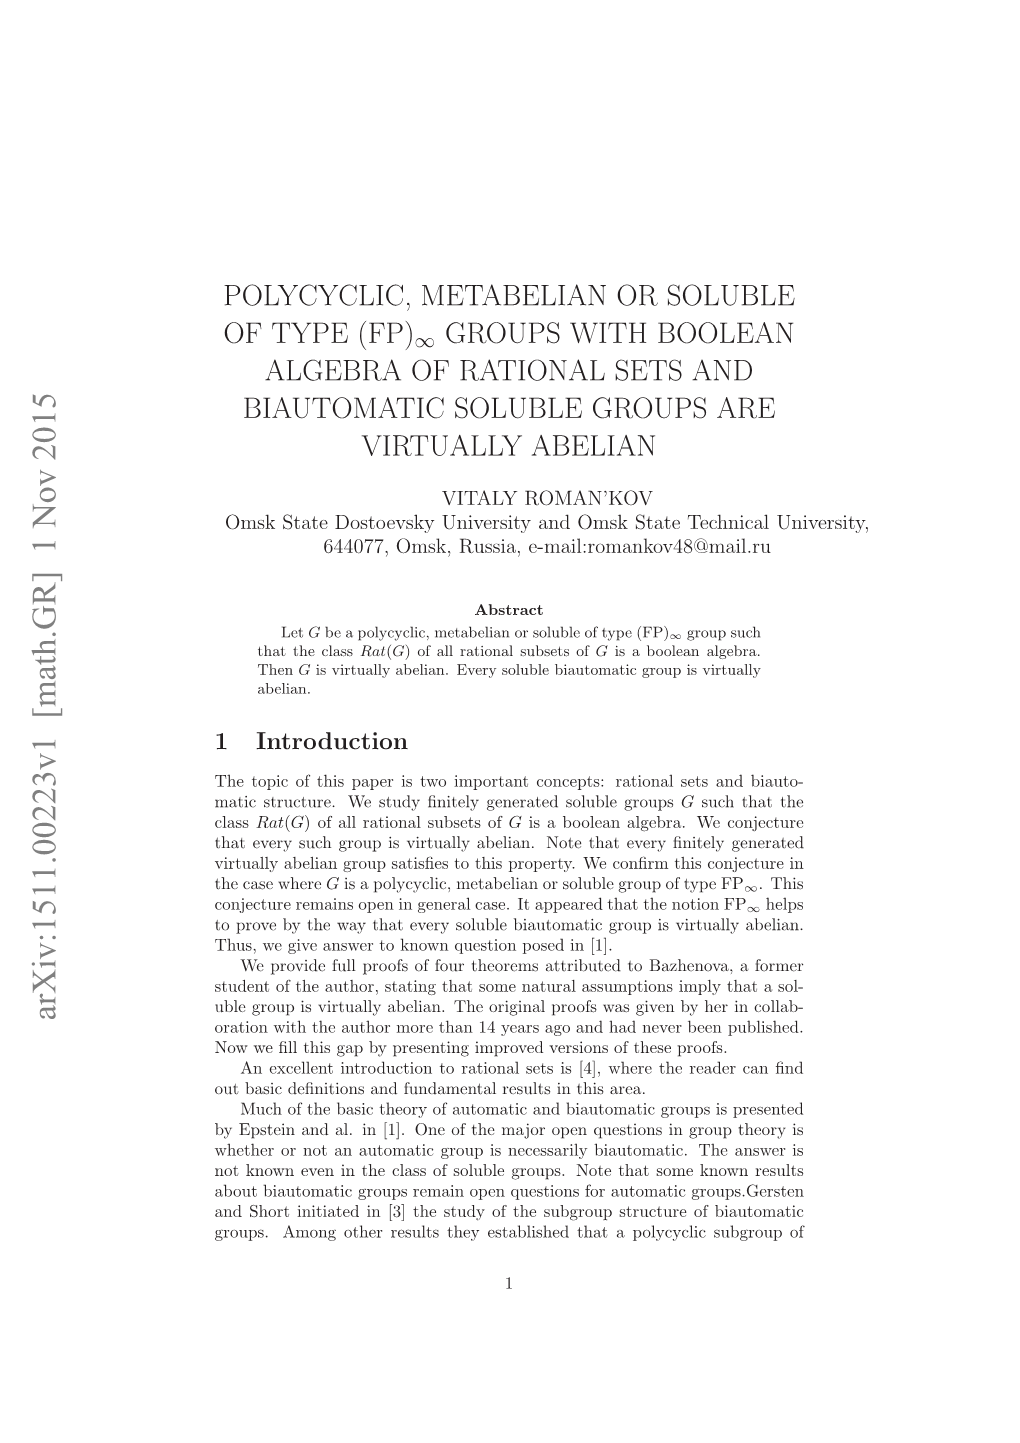 Polycyclic, Metabelian Or Soluble of Type (FP) $ {\Infty} $ Groups With